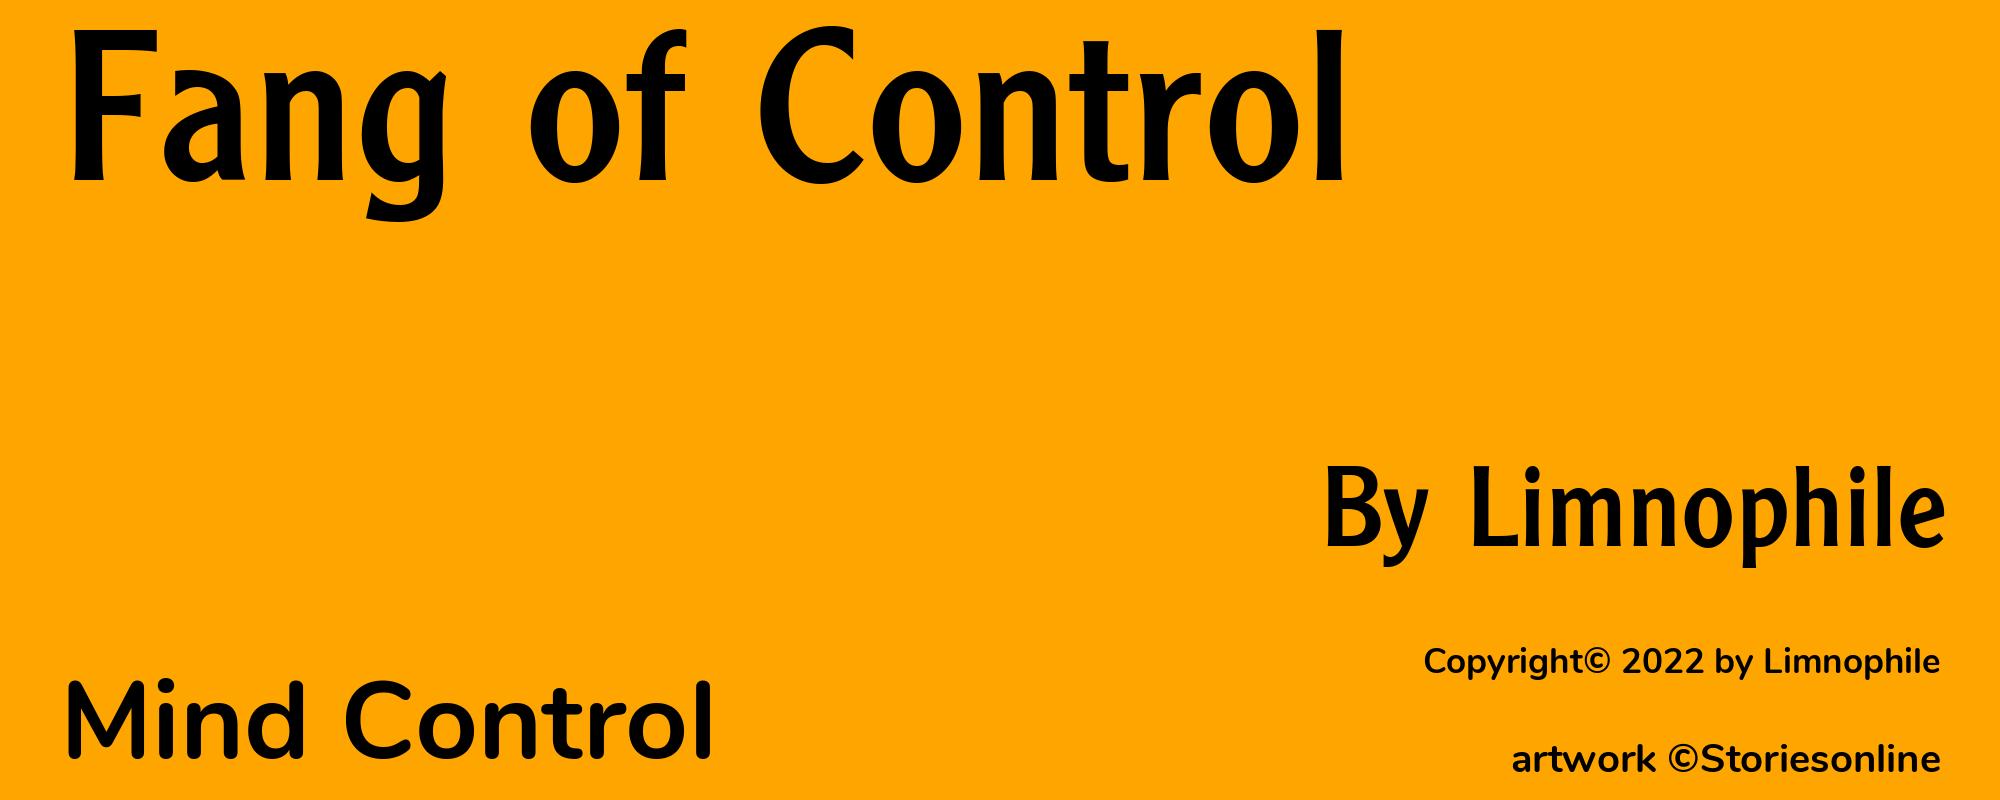 Fang of Control - Cover